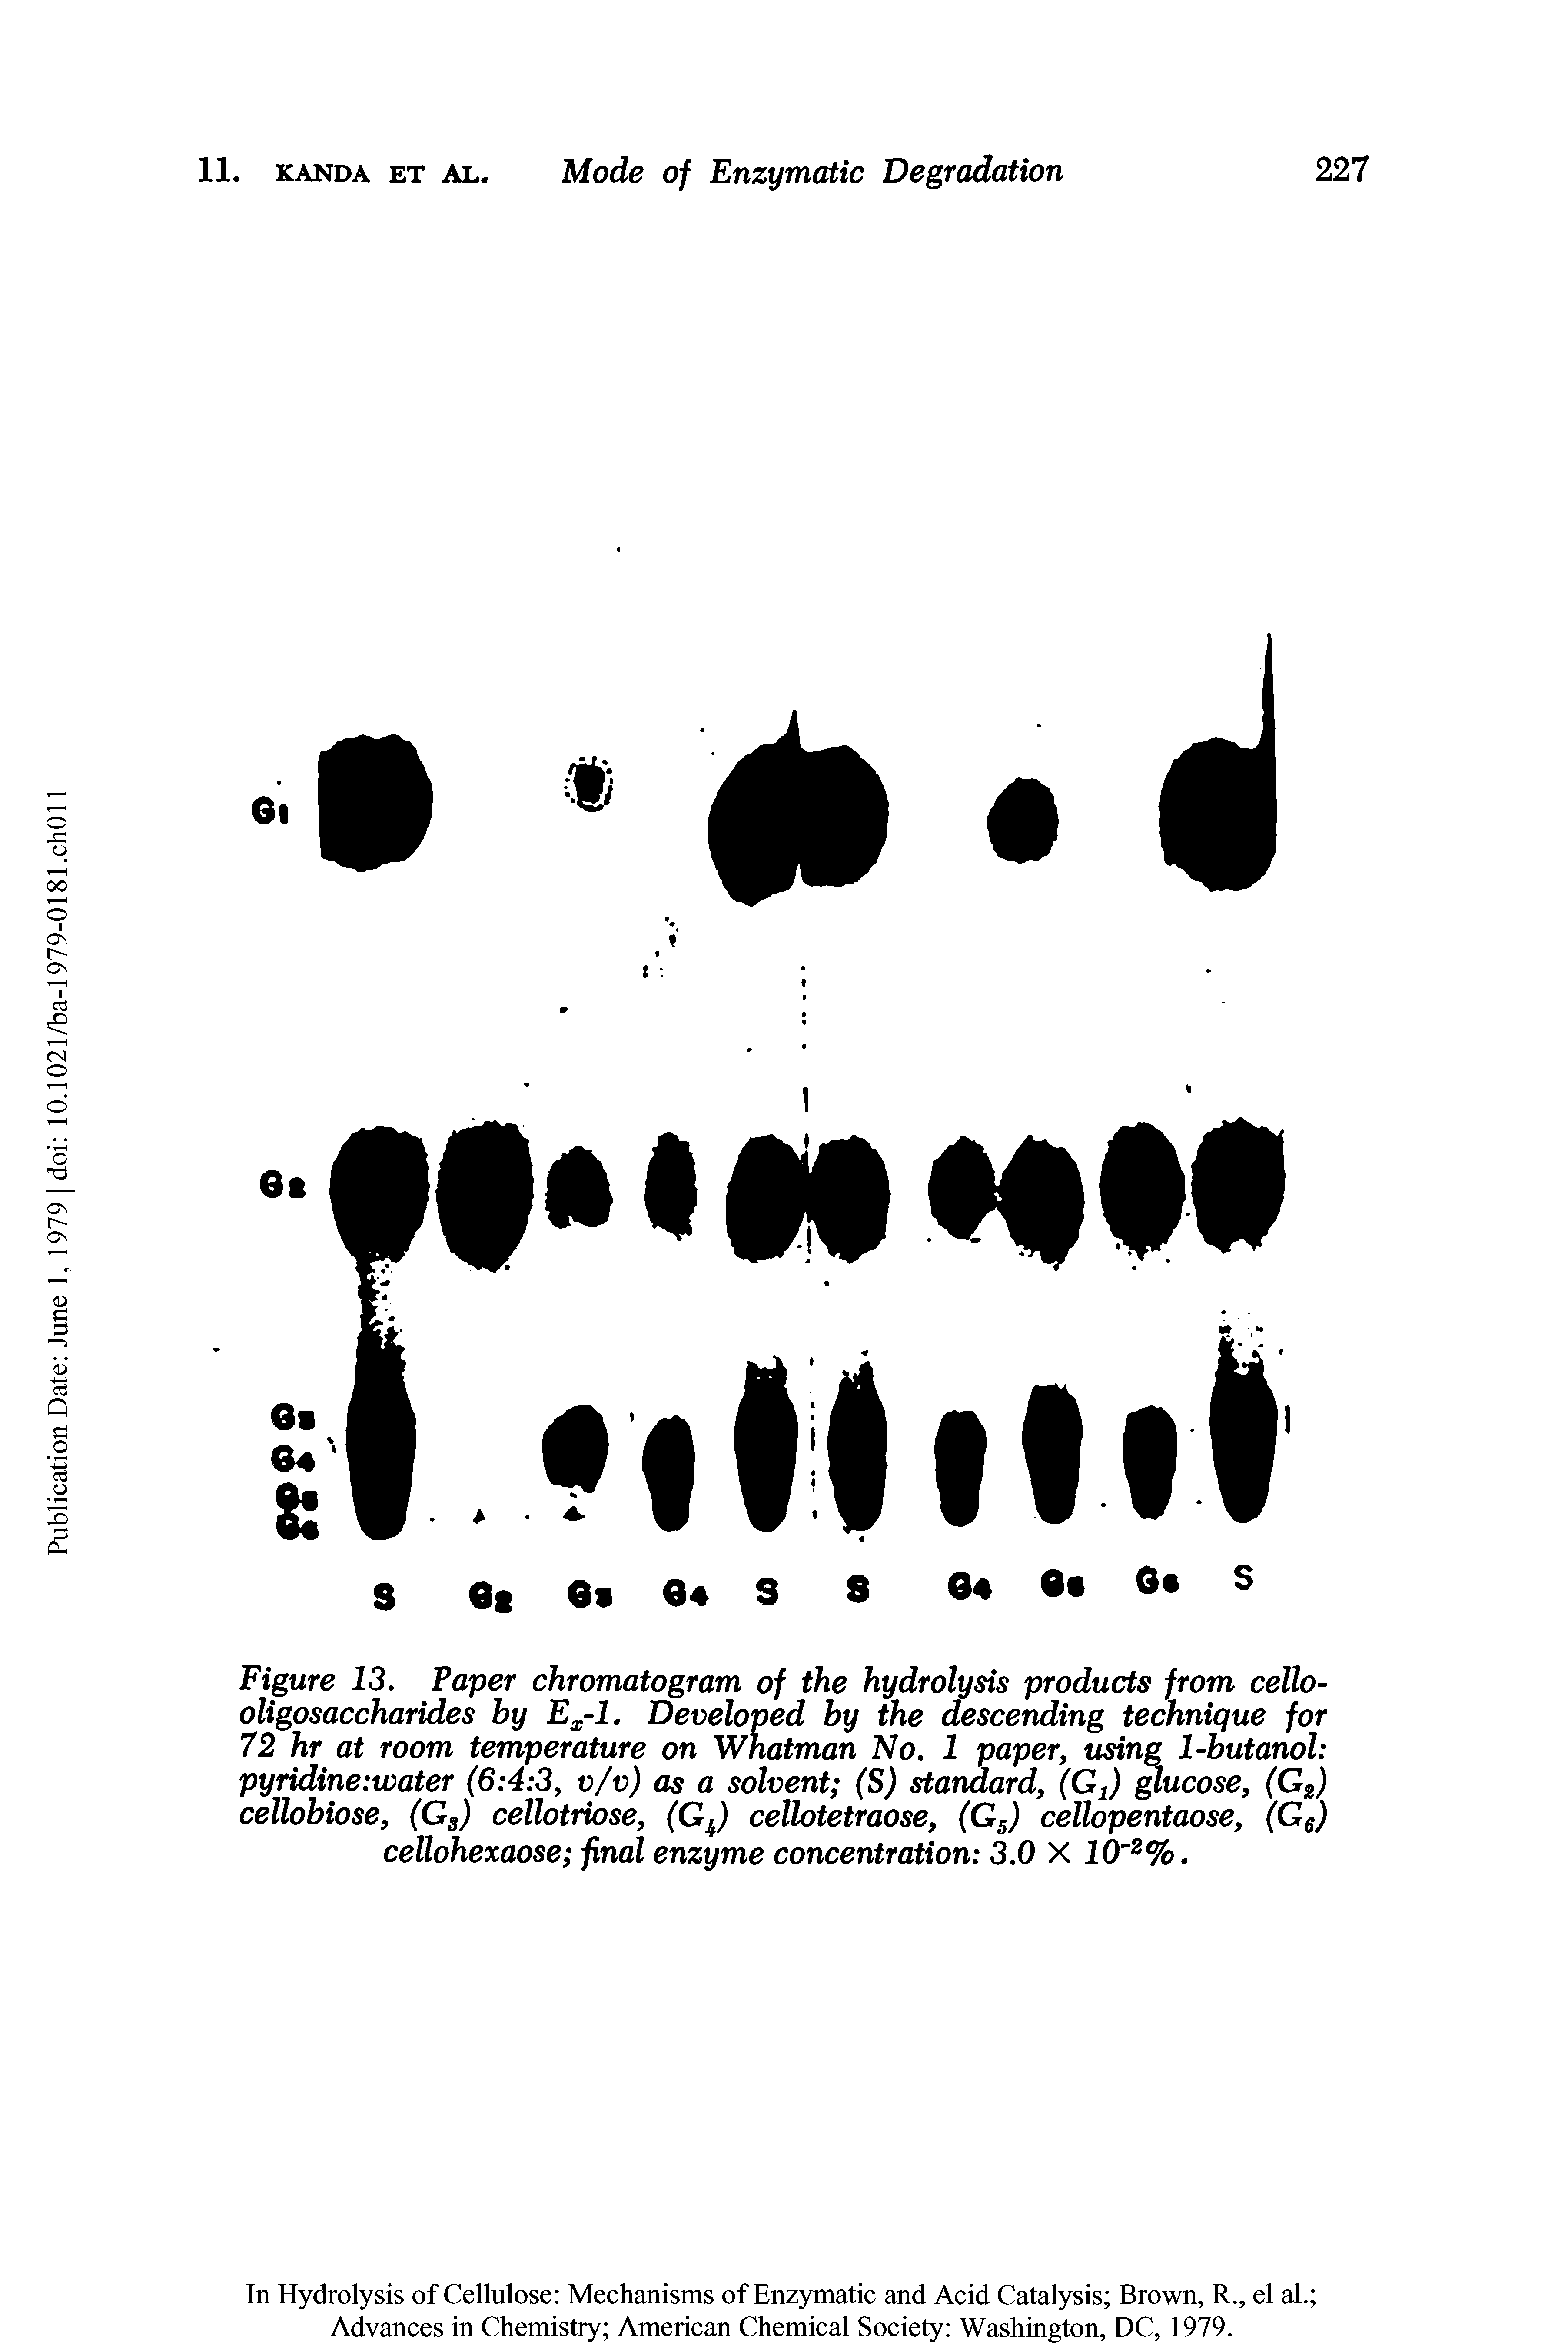 Figure 13. Taper chromatogram of the hydrolysis products from cello-oligosaccharides by Ex-1. Developed by the descending technique for 72 hr at room temperature on Whatman No. 1 paper, using 1-butanol pyridine water (6 4 3, v/v) as a solvent (S) standard, (Gt) glucose, (Ge) cellobiose, (Gs) cellotriose, (Gu) cellotetraose, (G5) cellopentaose, (G6) cellohexaose final enzyme concentration 3.0 X 10 2%.